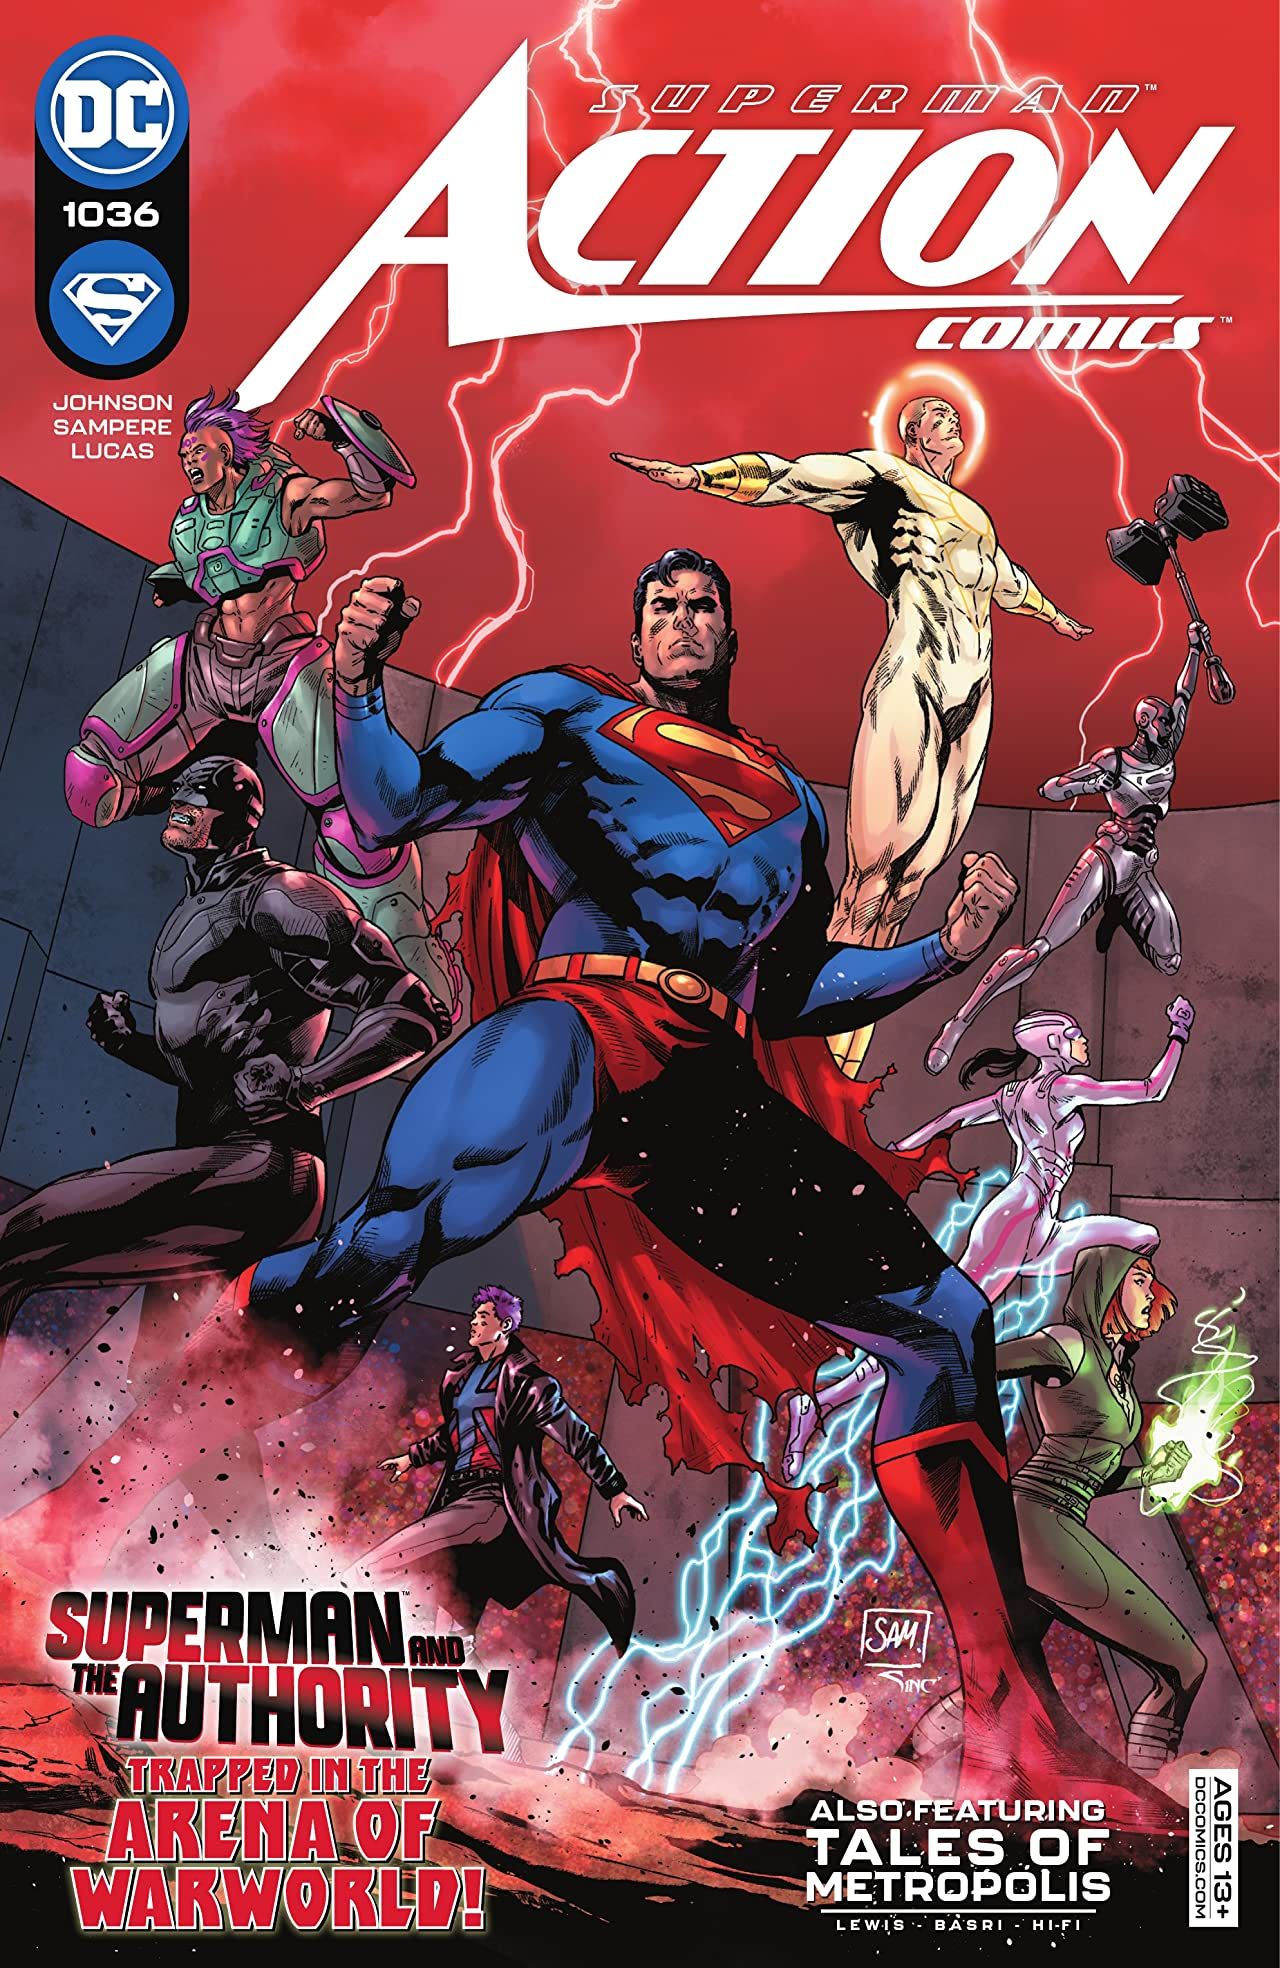 Superman on the cover of Action Comics 1036 by Daniel Sampere